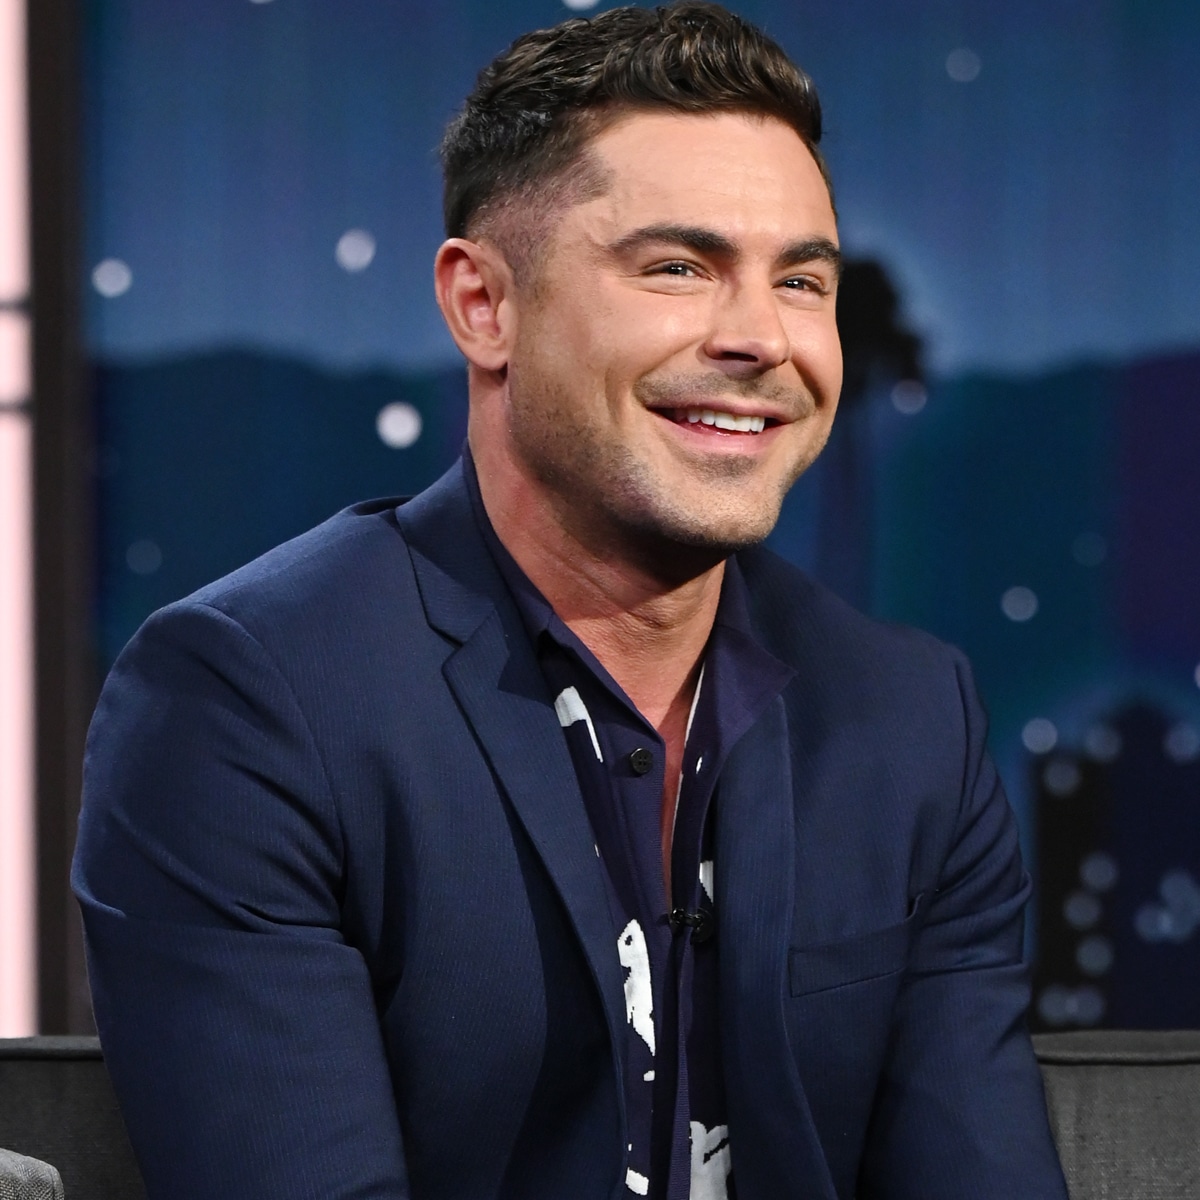 This Shirtless Zac Efron Photo Will Have You Doing a Double Take - E! Online